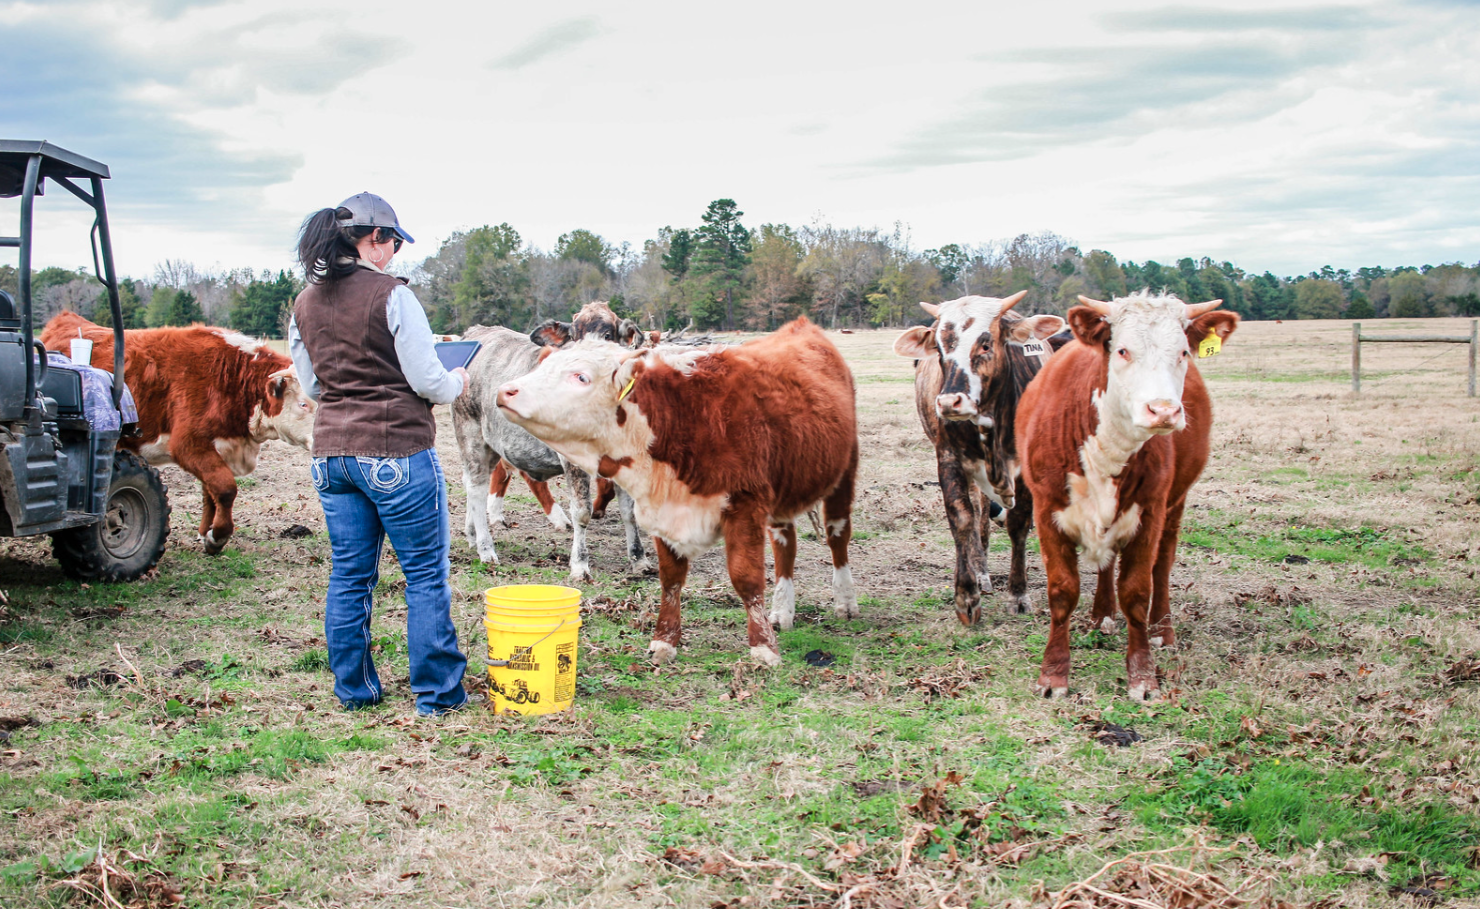 Ever changing ranching challenges require new management solutions